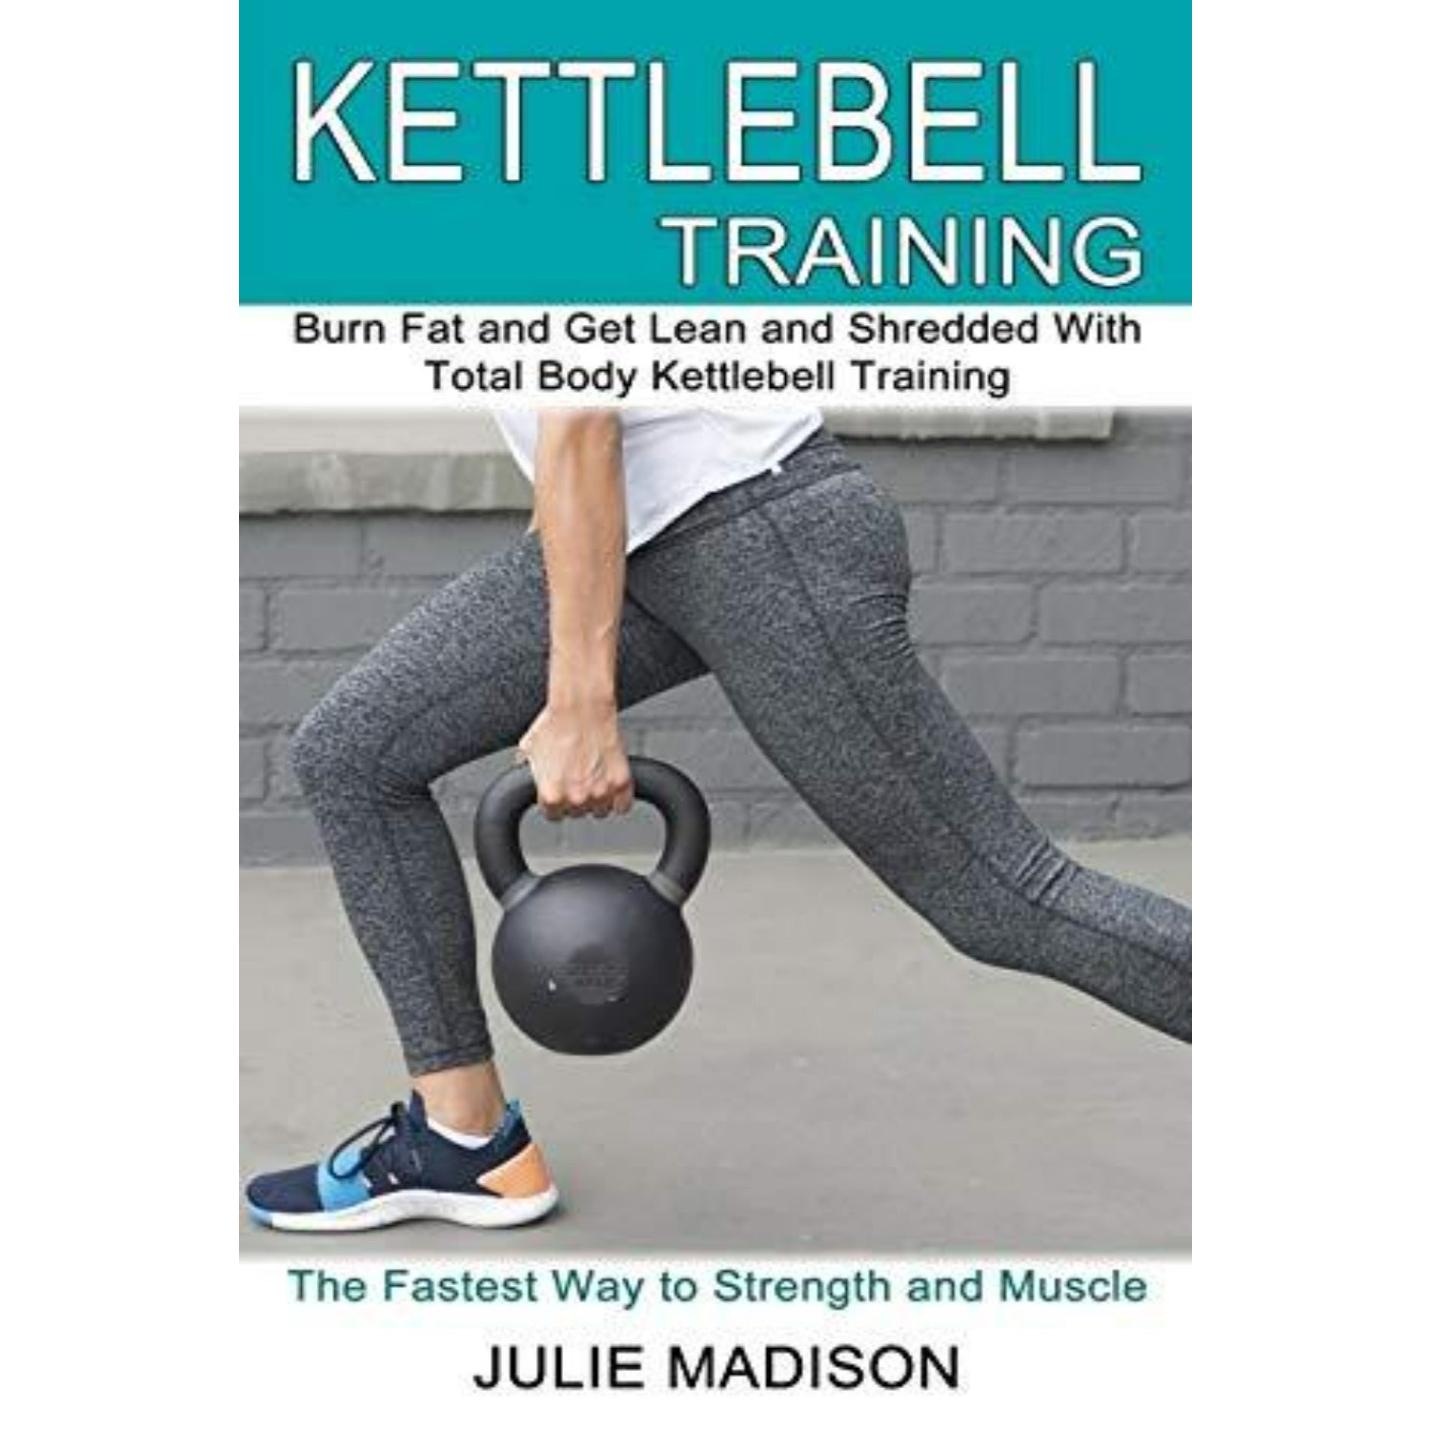 Kettlebell Training: Burn Fat and Get Lean and Shredded With Total Body Kettlebell Training (The Fastest Way to Strength and Muscle) - happygetfit.com